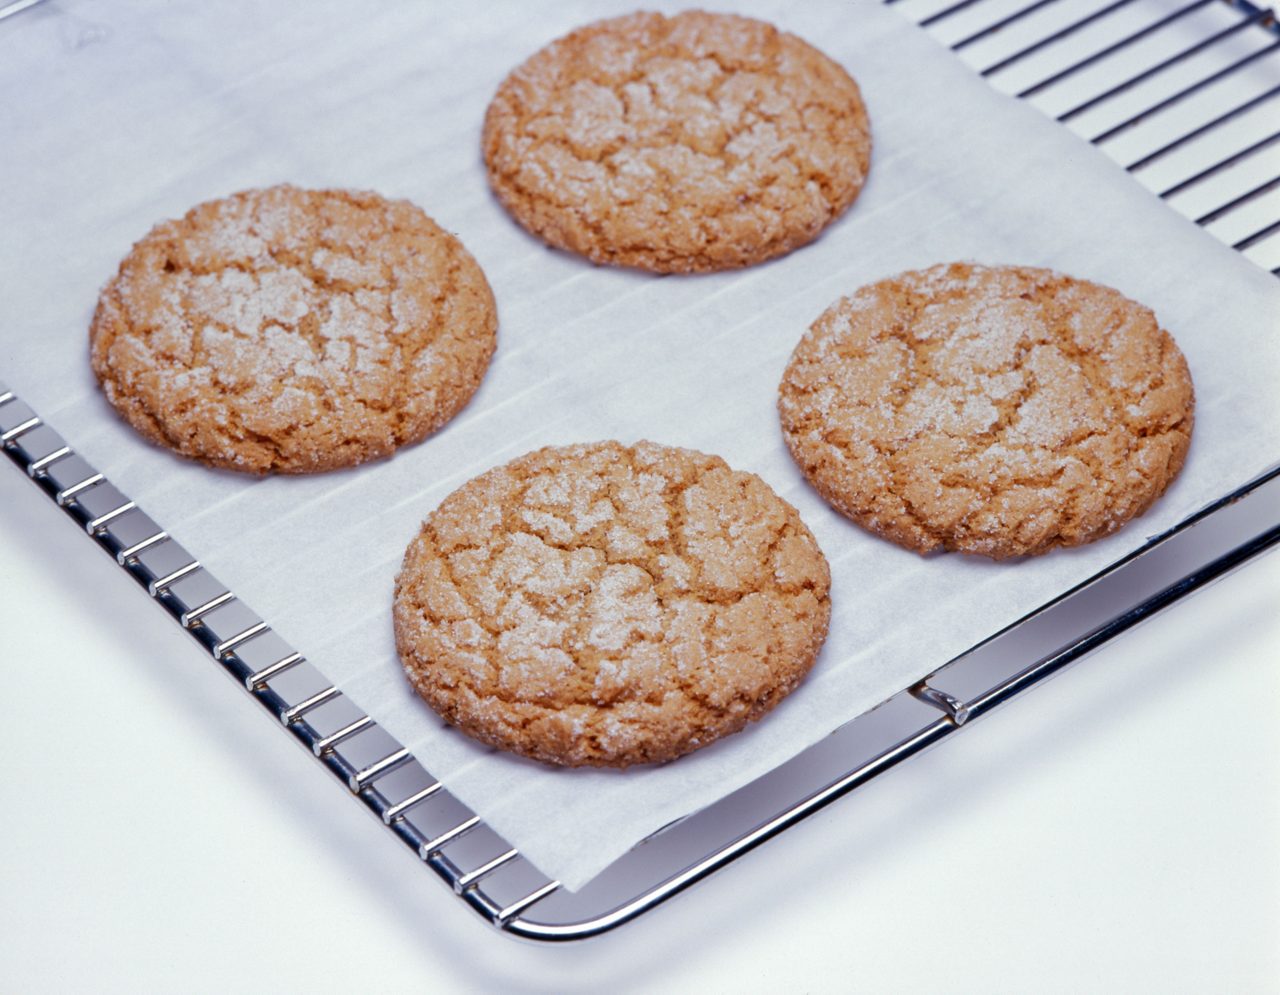 Cookies on baking rack using baking release paper. Paper Industry / Solutions for Release Coating Success